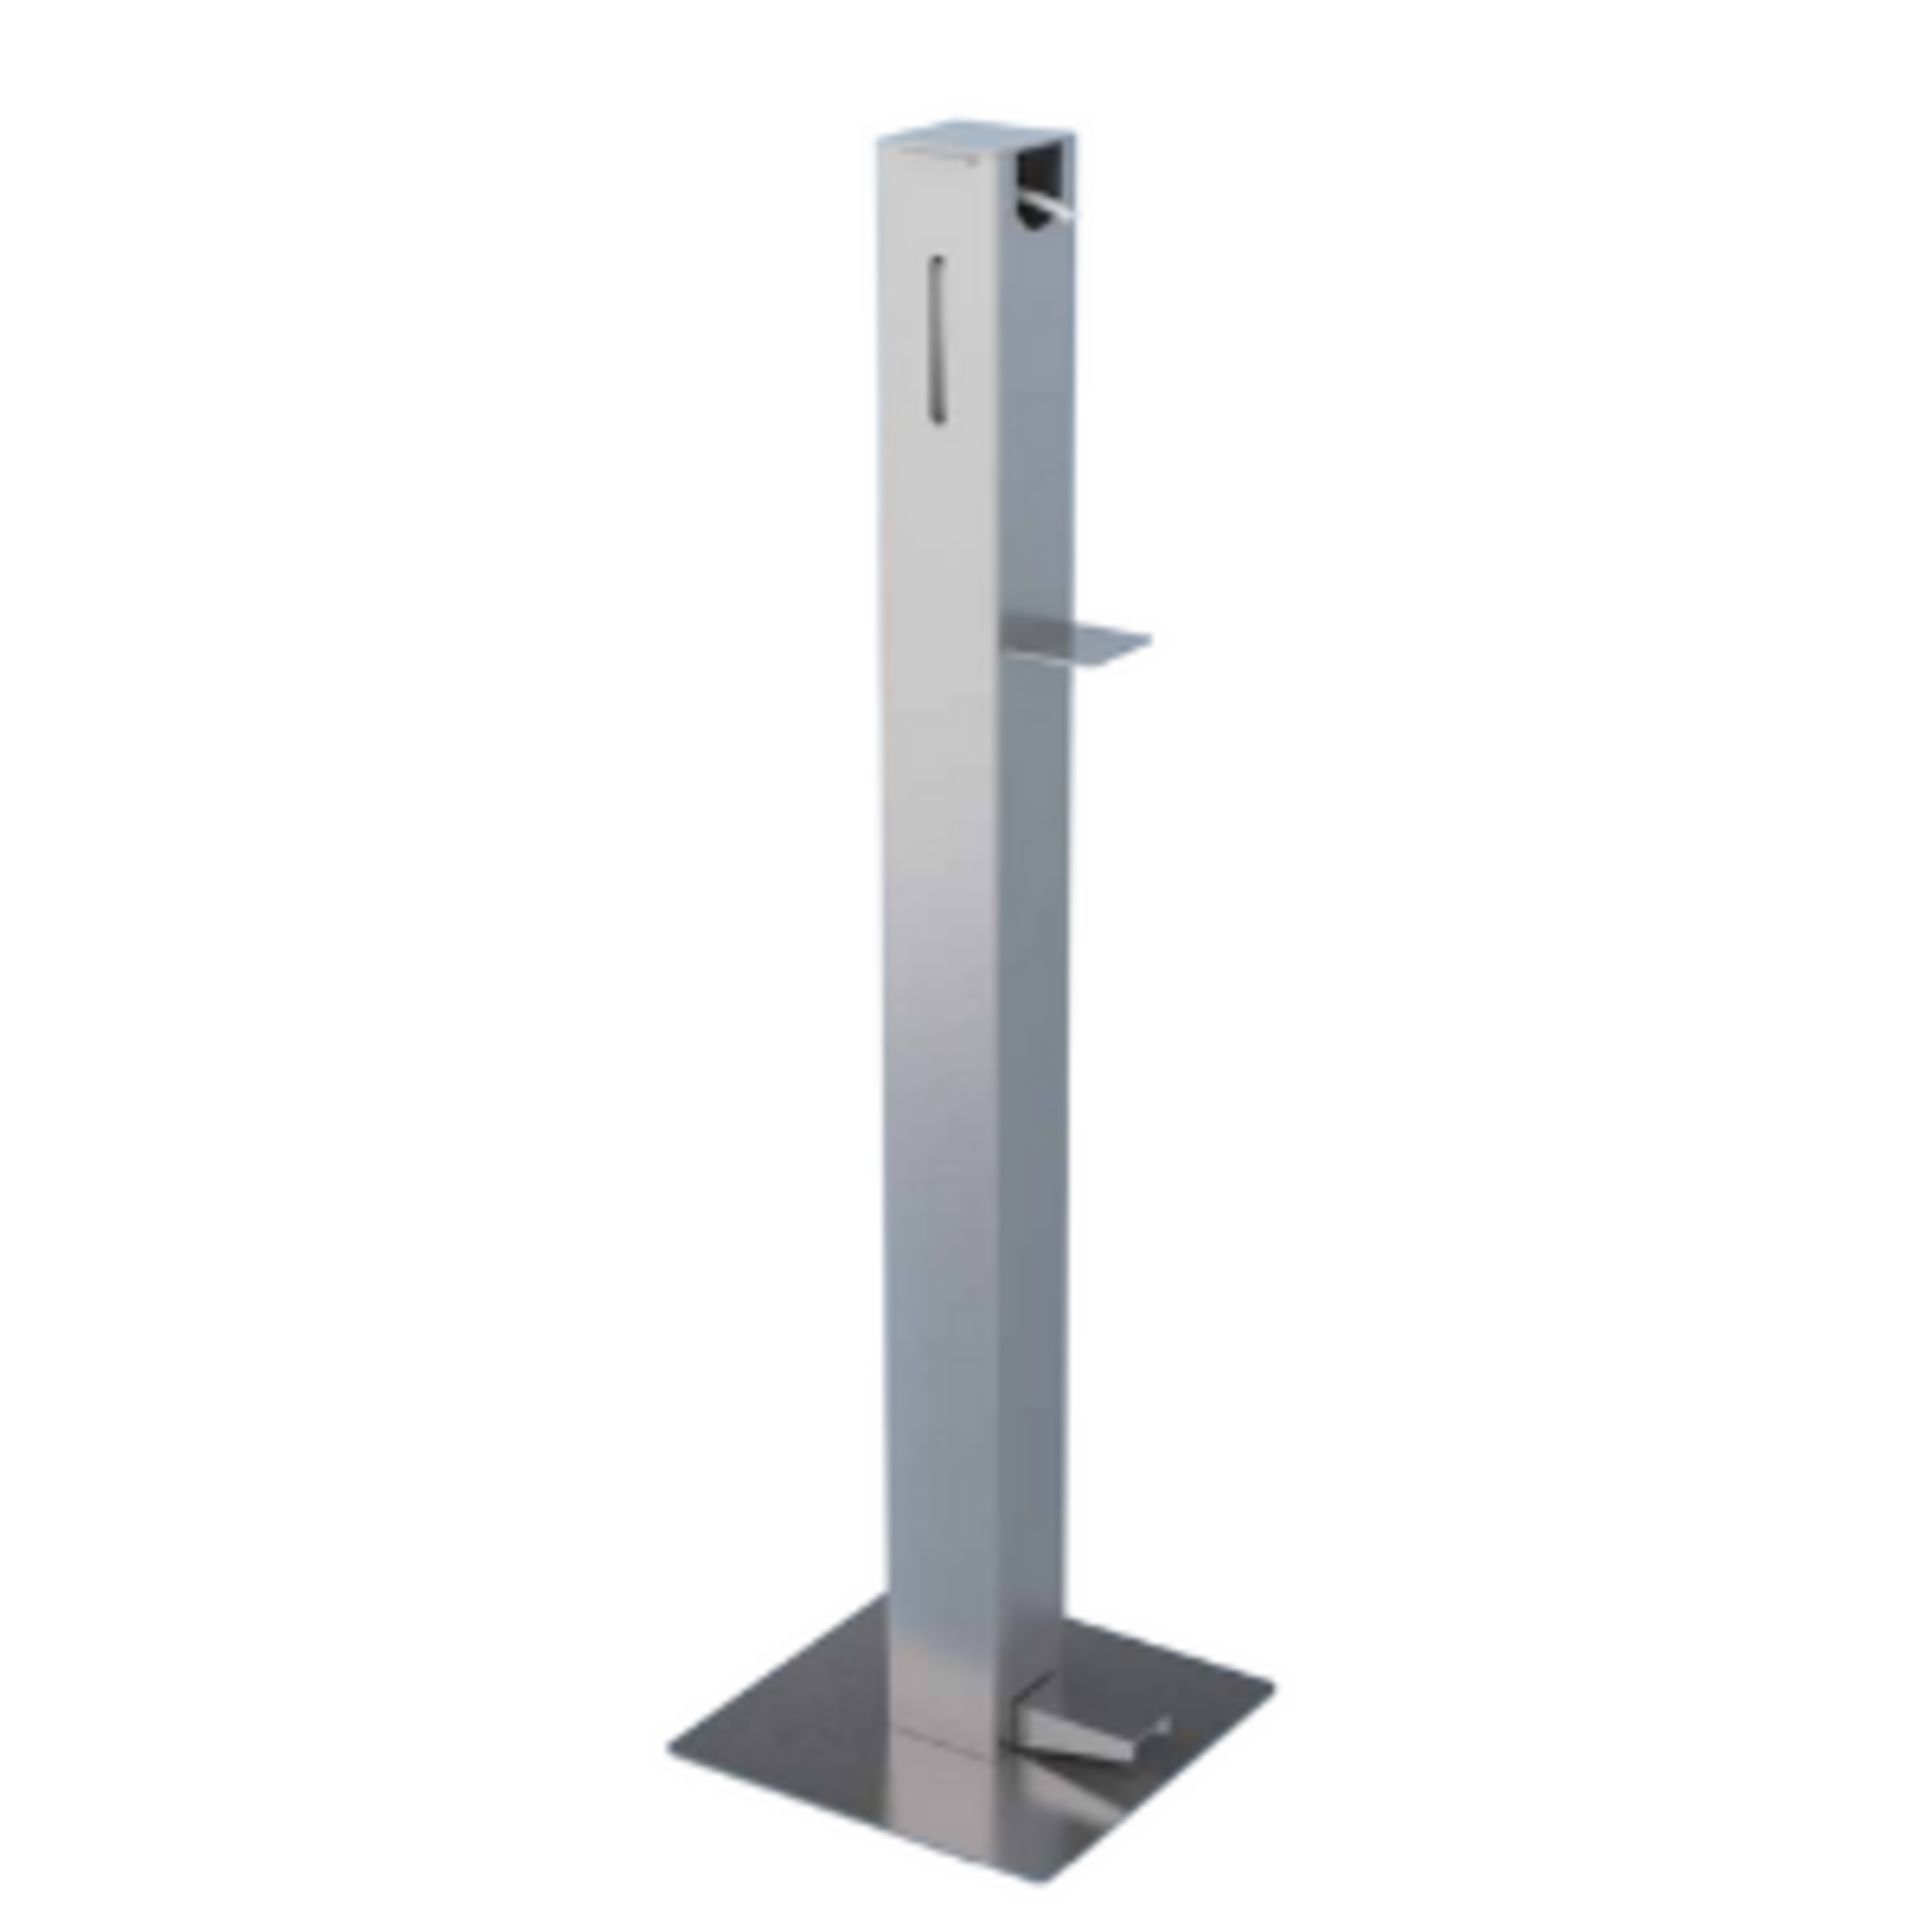 Presols Free Standing Sanitisation Station | Foot Pedal Dispenser | touch Free | Stainless Steel - Image 2 of 6